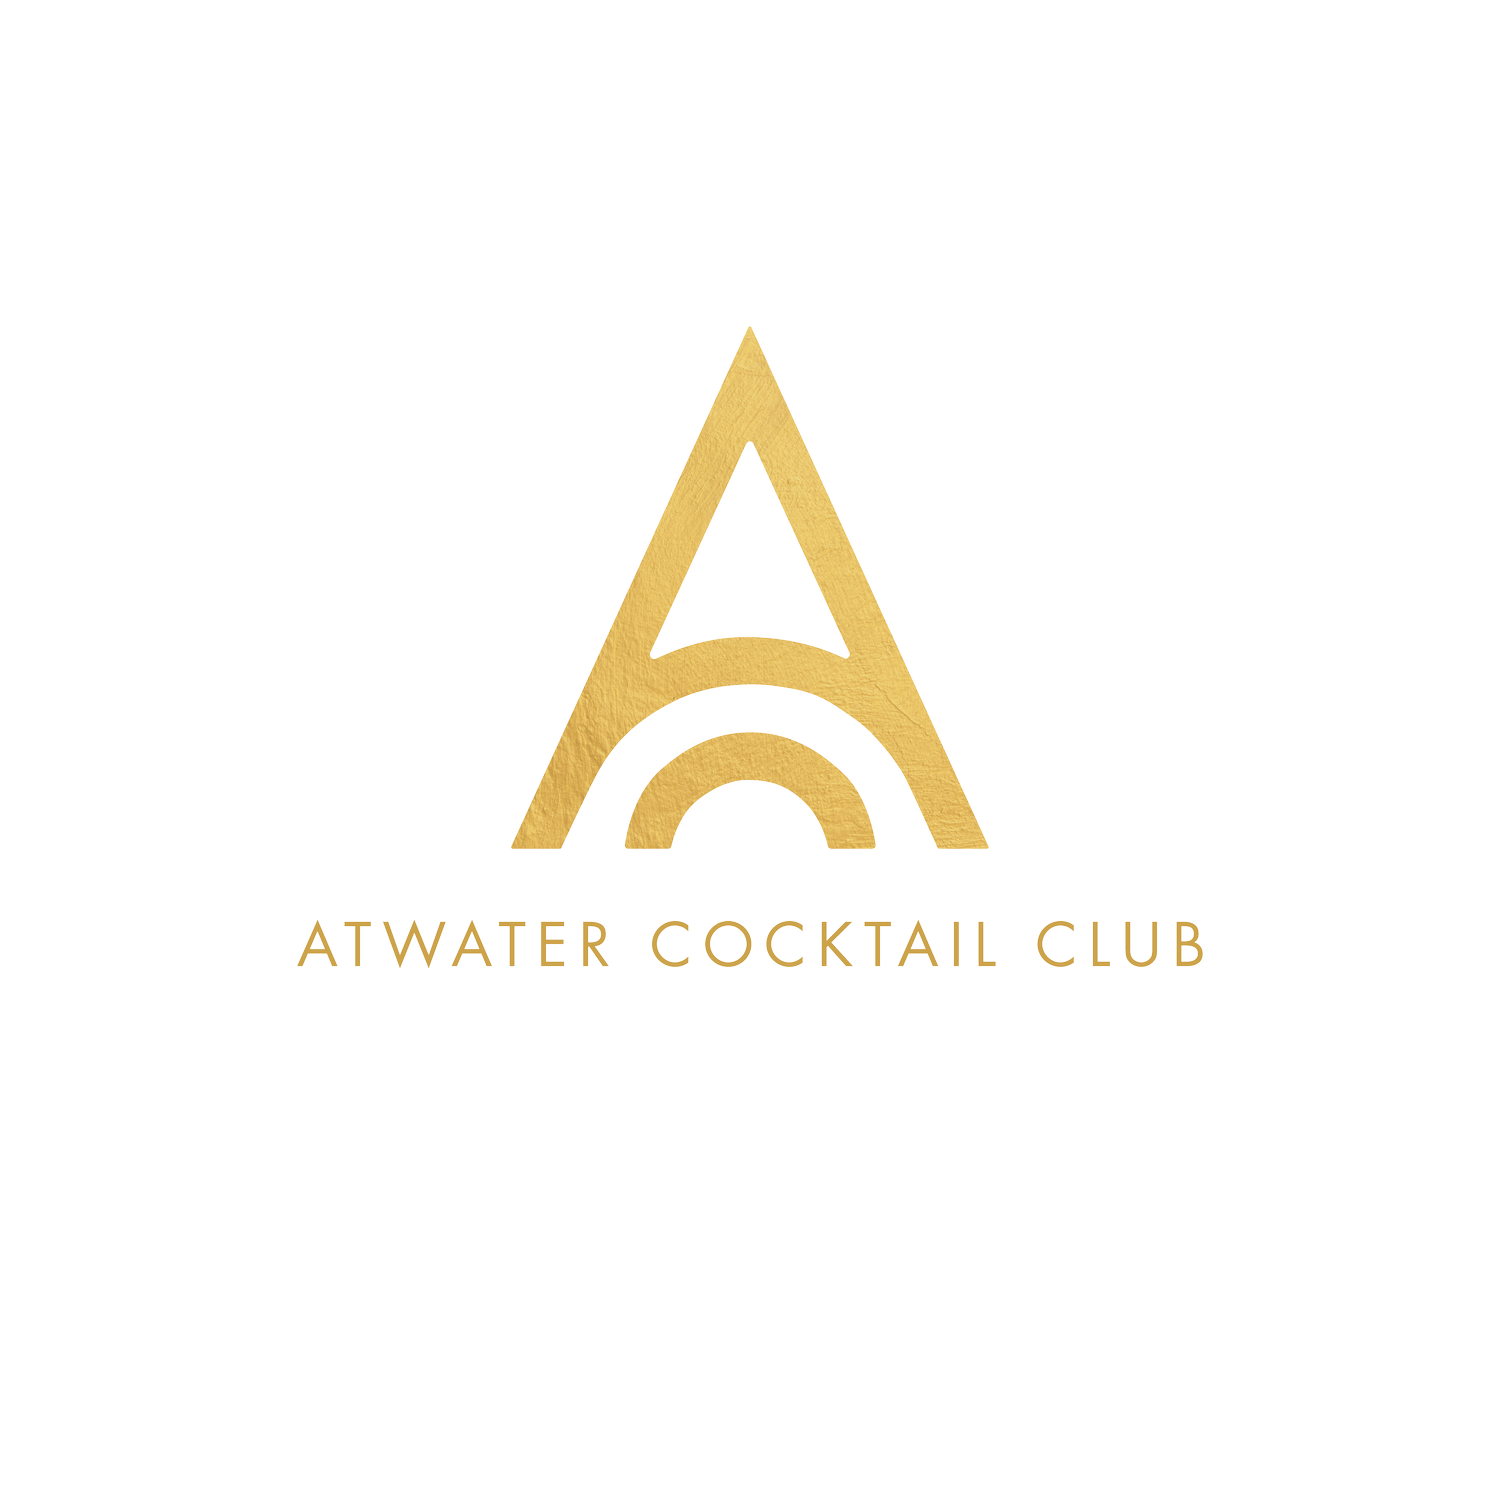 Atwater cocktail club